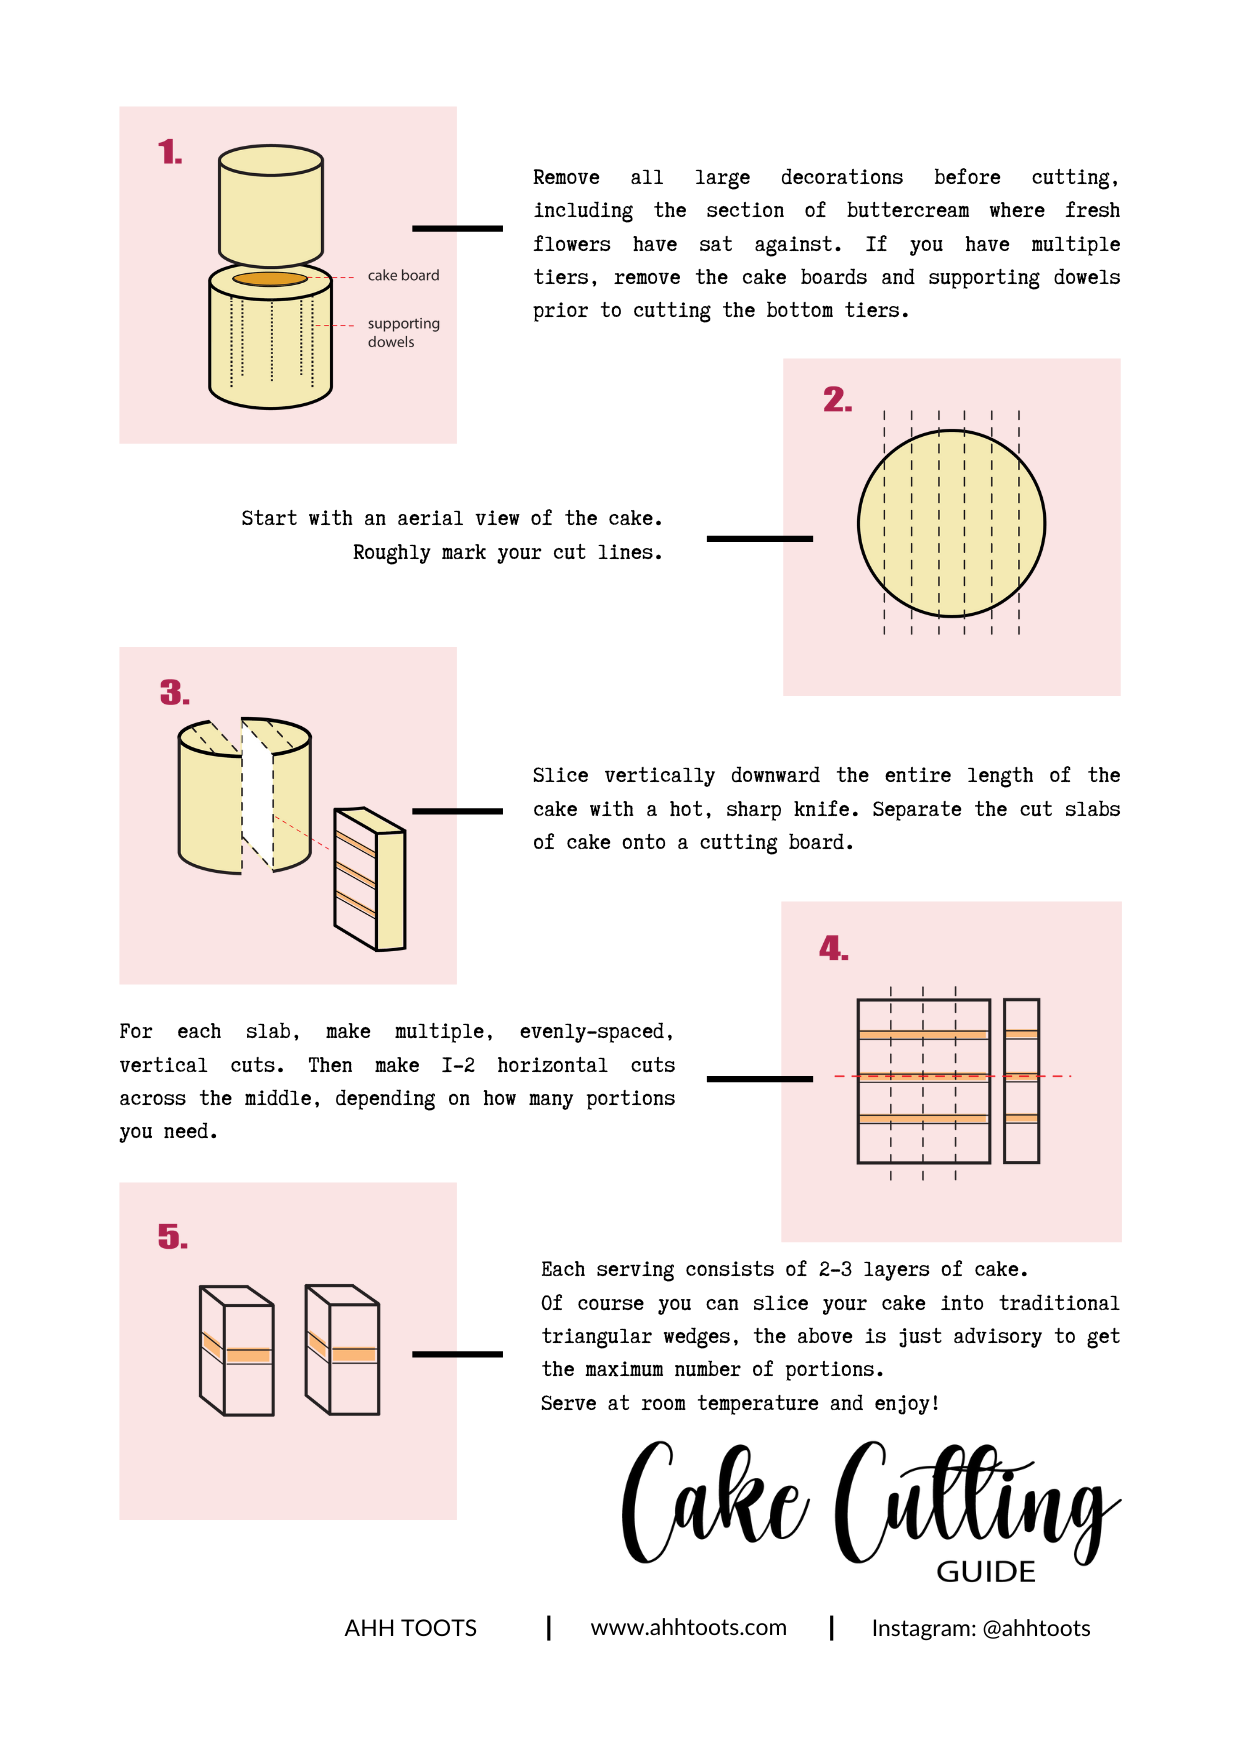 https://ahhtoots.com/wp-content/uploads/2022/02/Copy-of-Cake-Care-Cake-Cutting-Guide-1-1.png